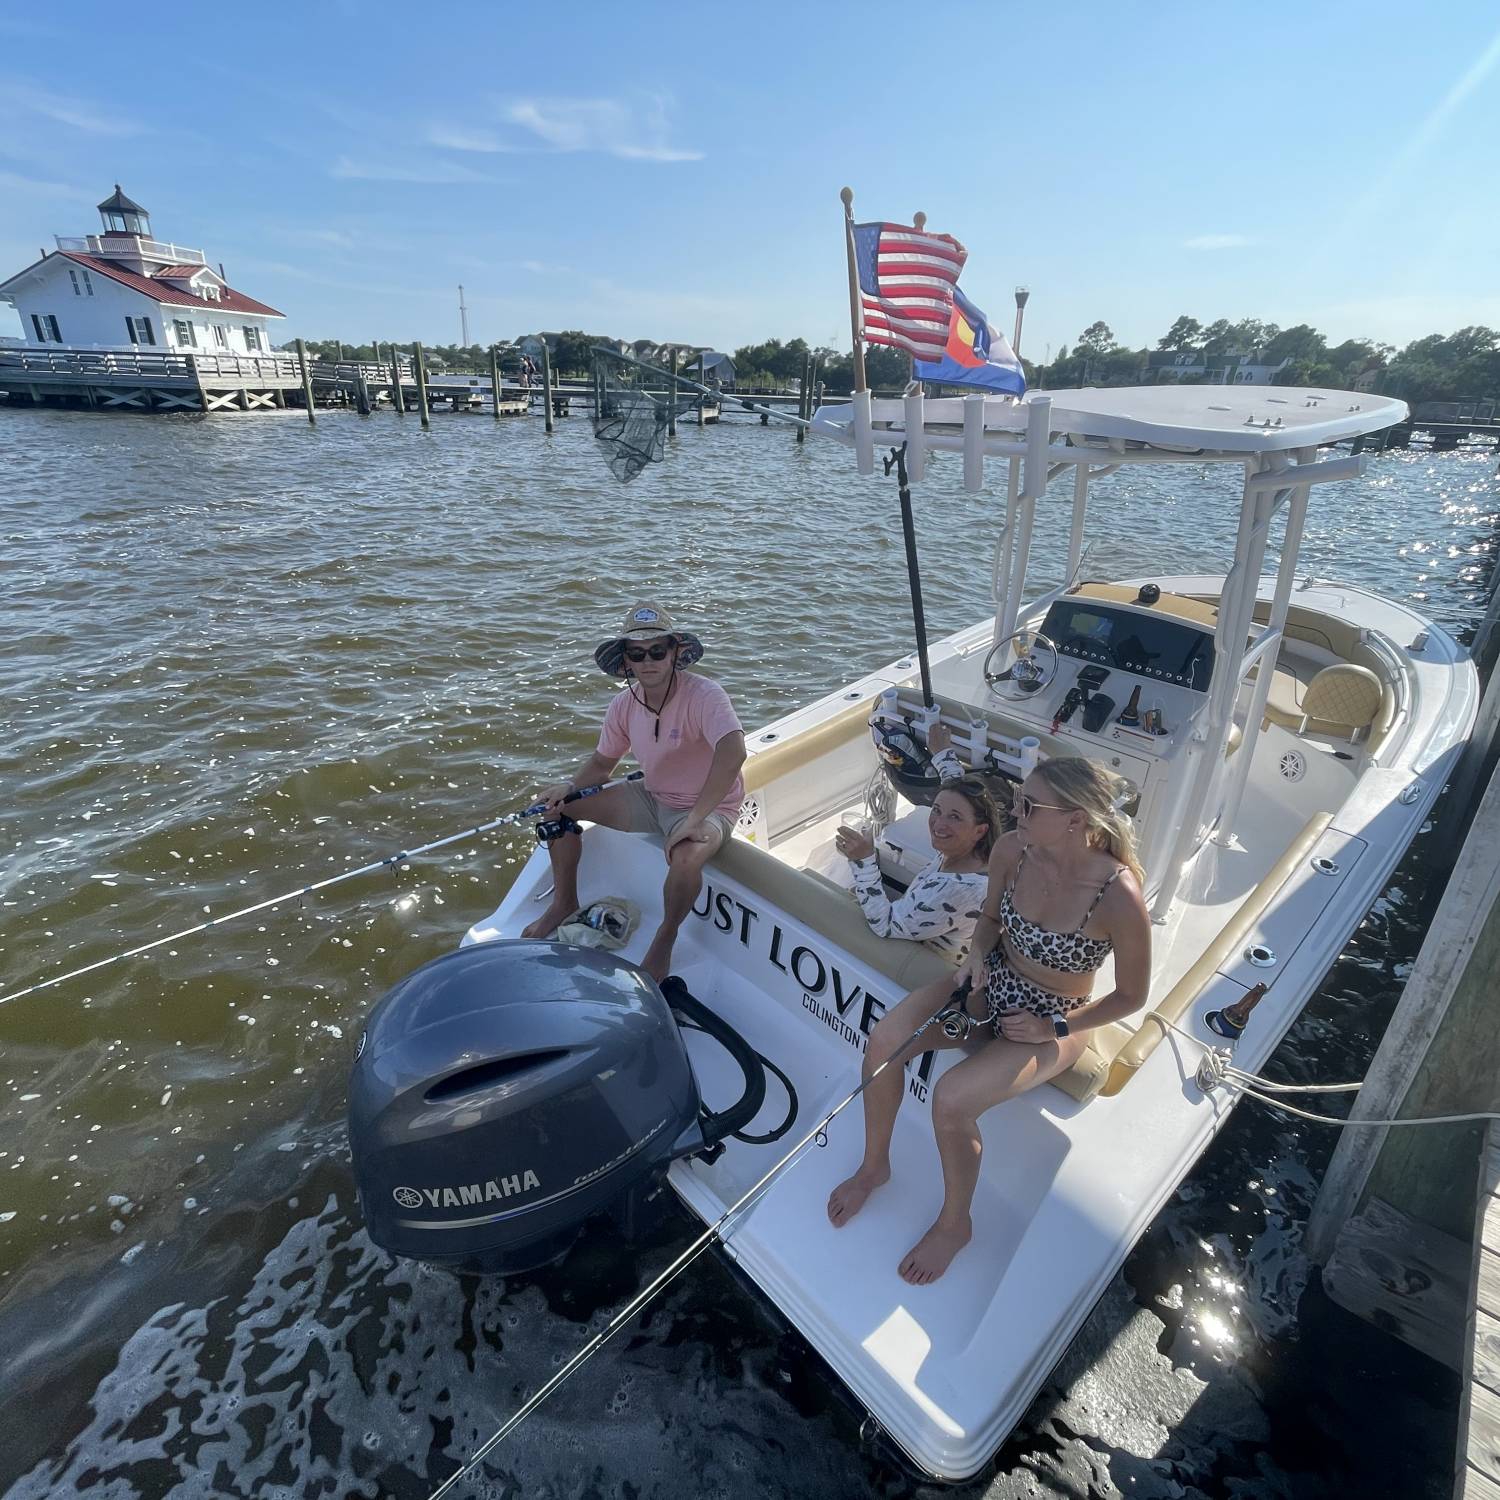 Title: Fishing in Manteo - On board their Sportsman Heritage 211 Center Console - Location: Manteo, North Carolina. Participating in the Photo Contest #SportsmanAugust2021